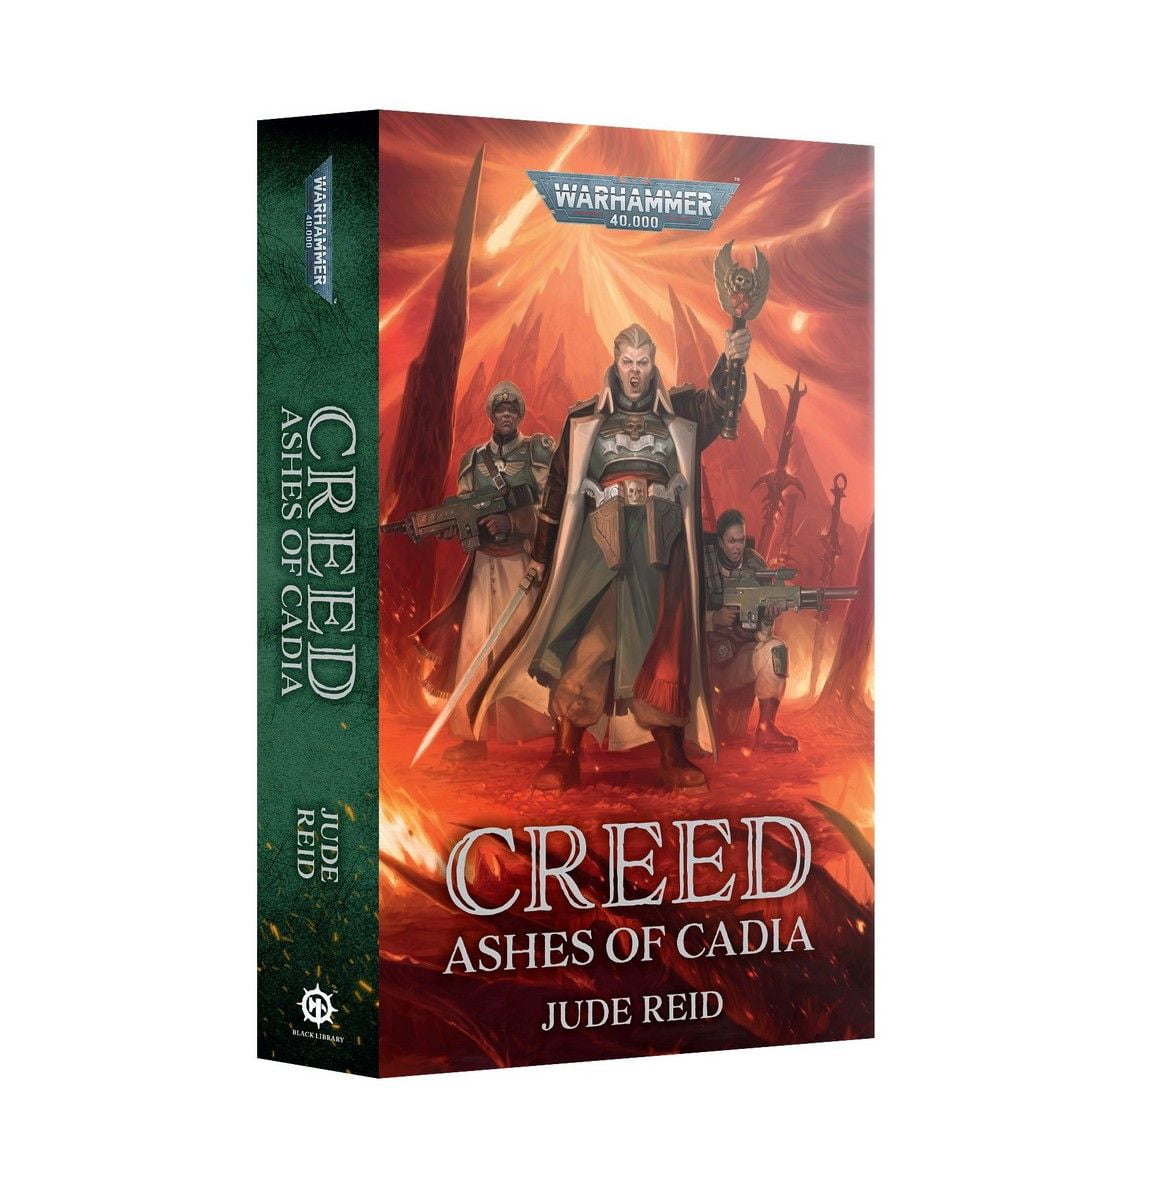 Creed: Ashes of Cadia Paperback